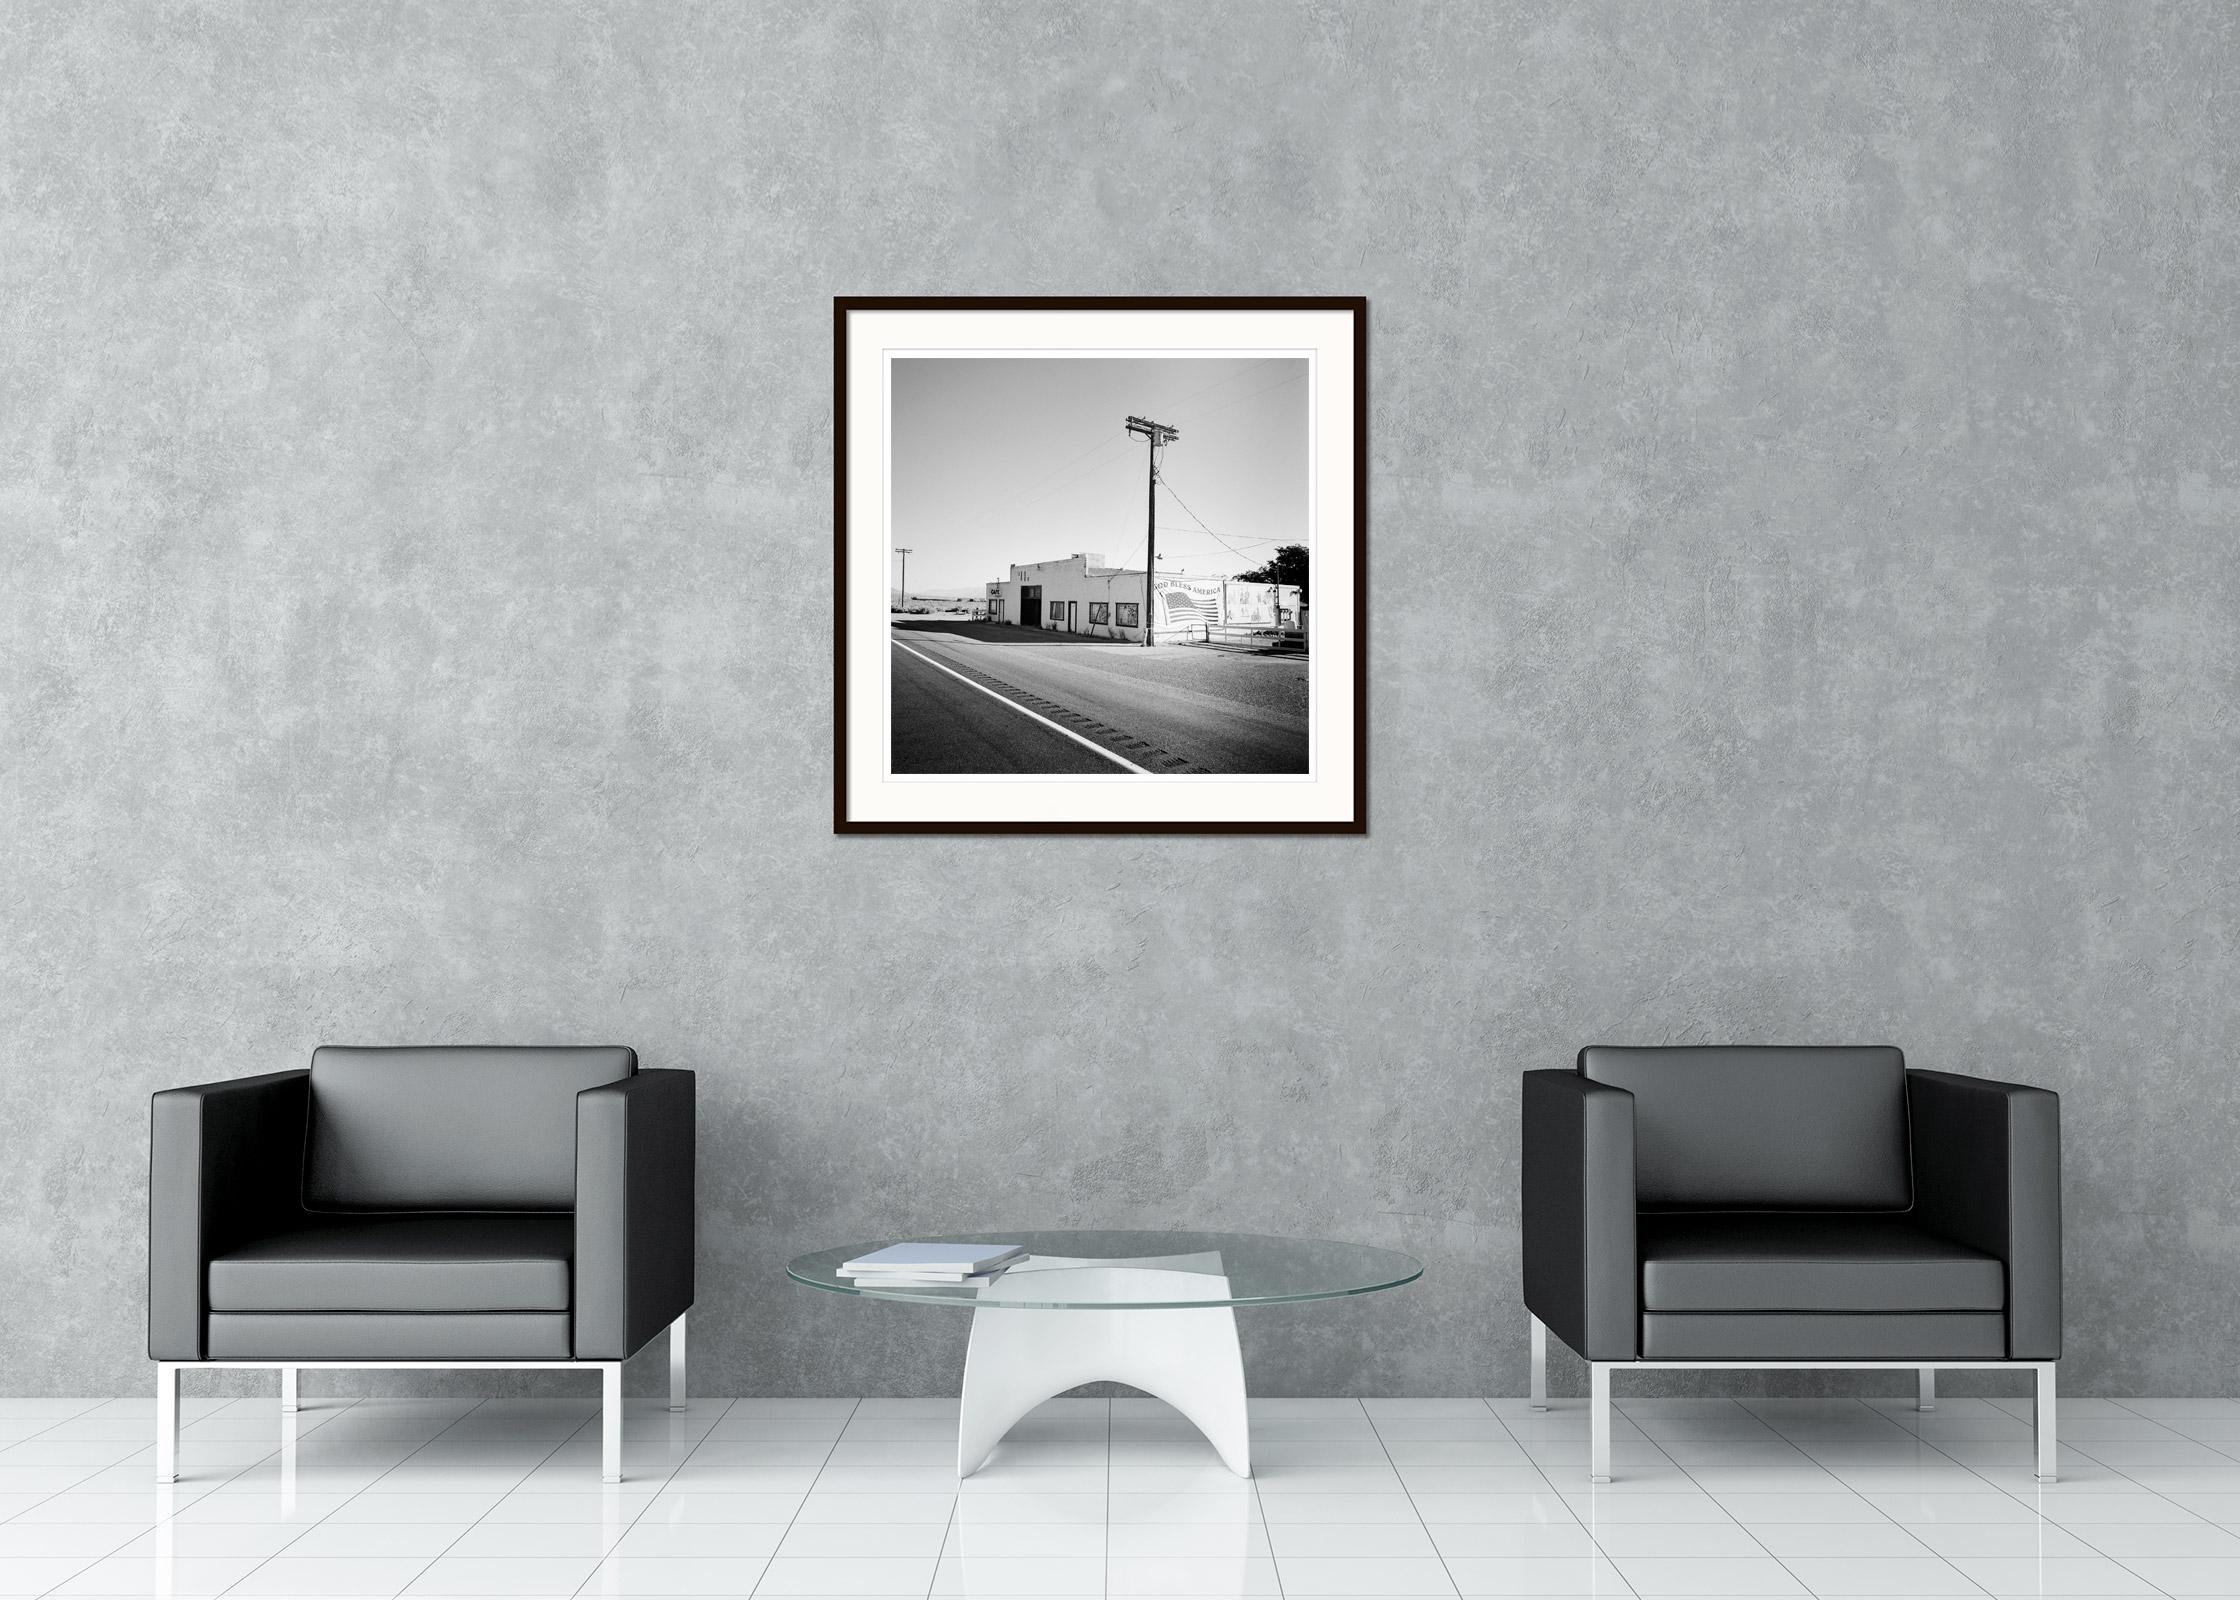 Black and white fine art long landscape photography. Archival pigment ink print as part of a limited edition of 9. All Gerald Berghammer prints are made to order in limited editions on Hahnemuehle Photo Rag Baryta. Each print is stamped on the back